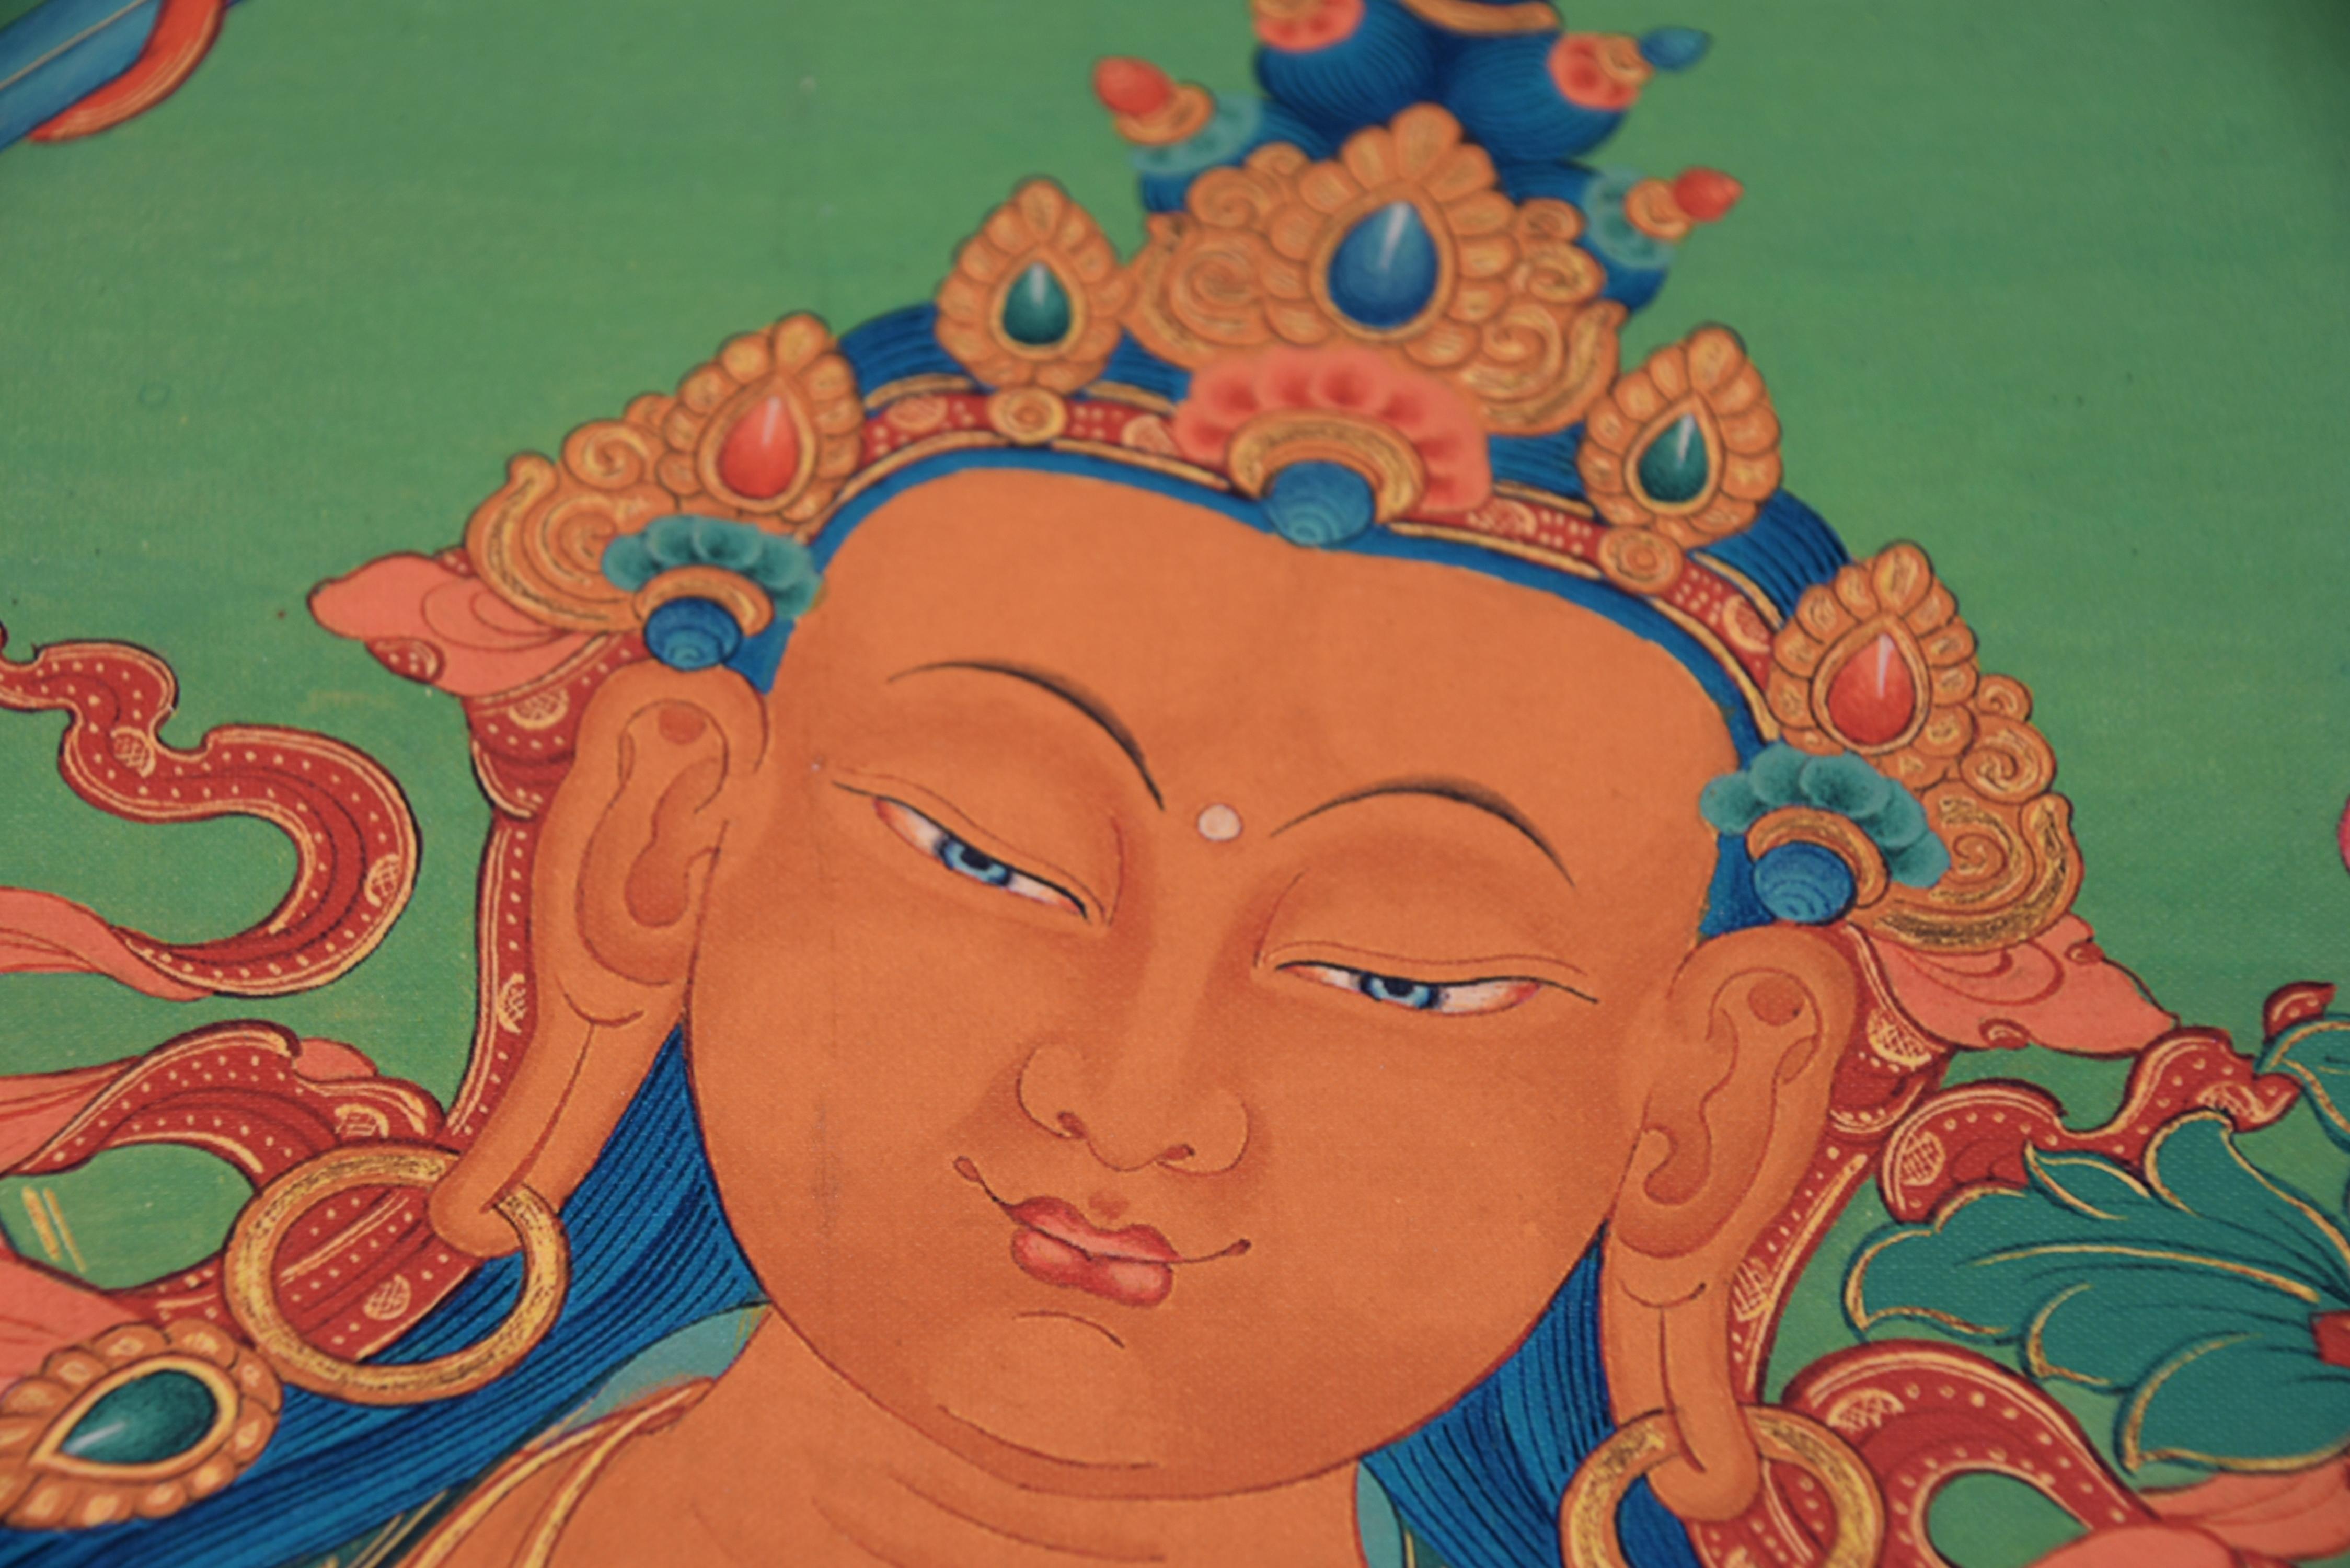 An one of a kind Thangka depicting the mighty Tibetan Manjushree, God of Divine Wisdom. Seated dhyana asana, rising above lapis blue sea, the full face with large downcast eyes under willow-leaf eyebrows flanked by pendulous earlobes adorned with